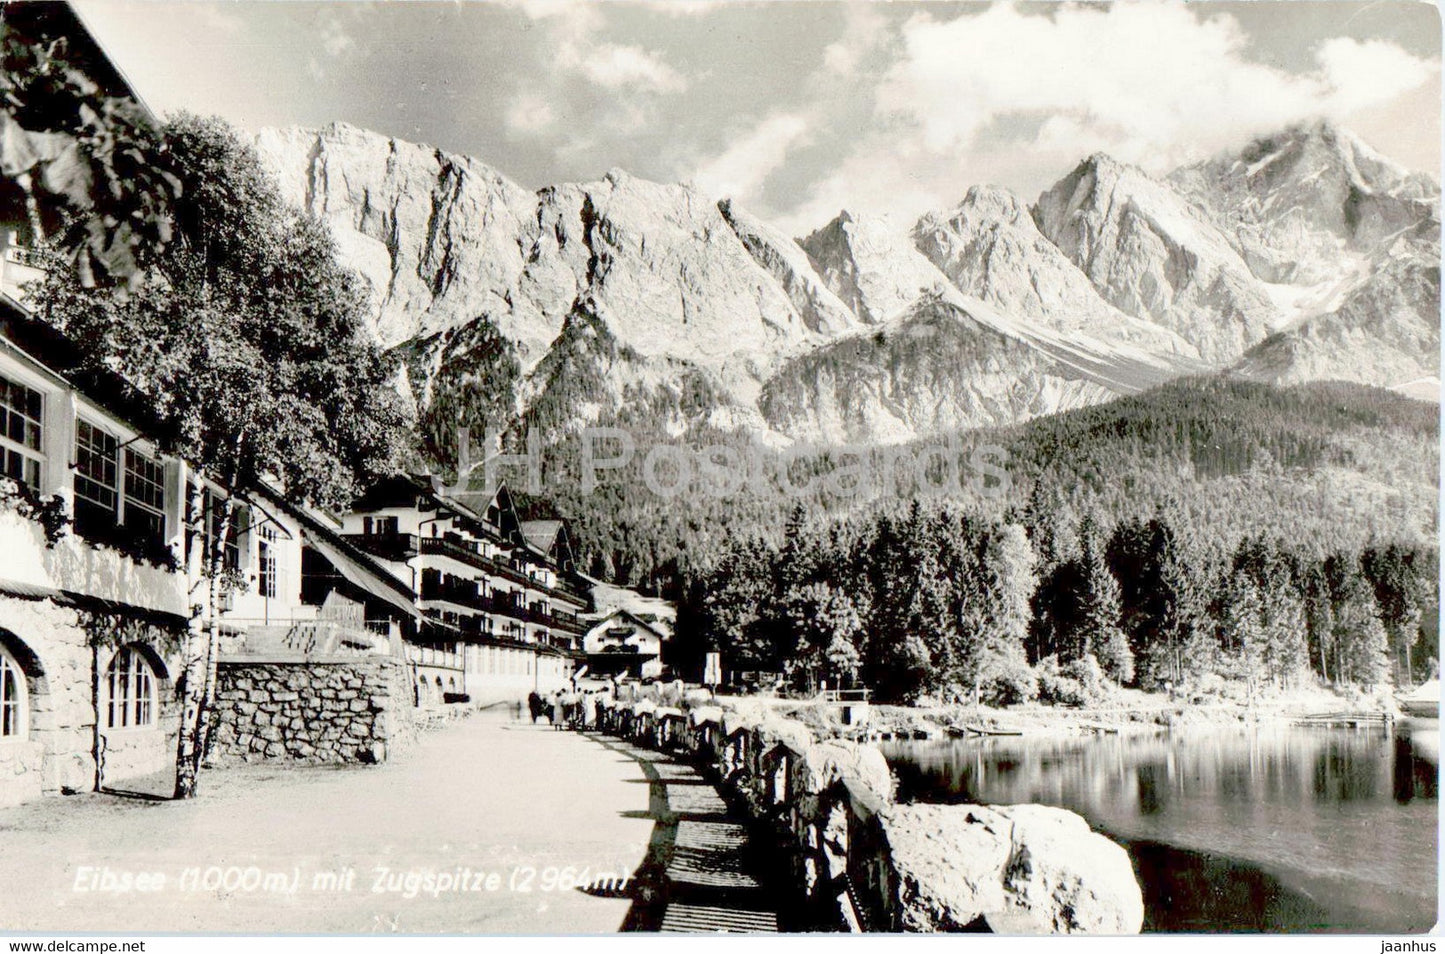 Eibsee 1000 m mit Zugspitze 2964 m - old postcard - 1957 - Germany - used - JH Postcards